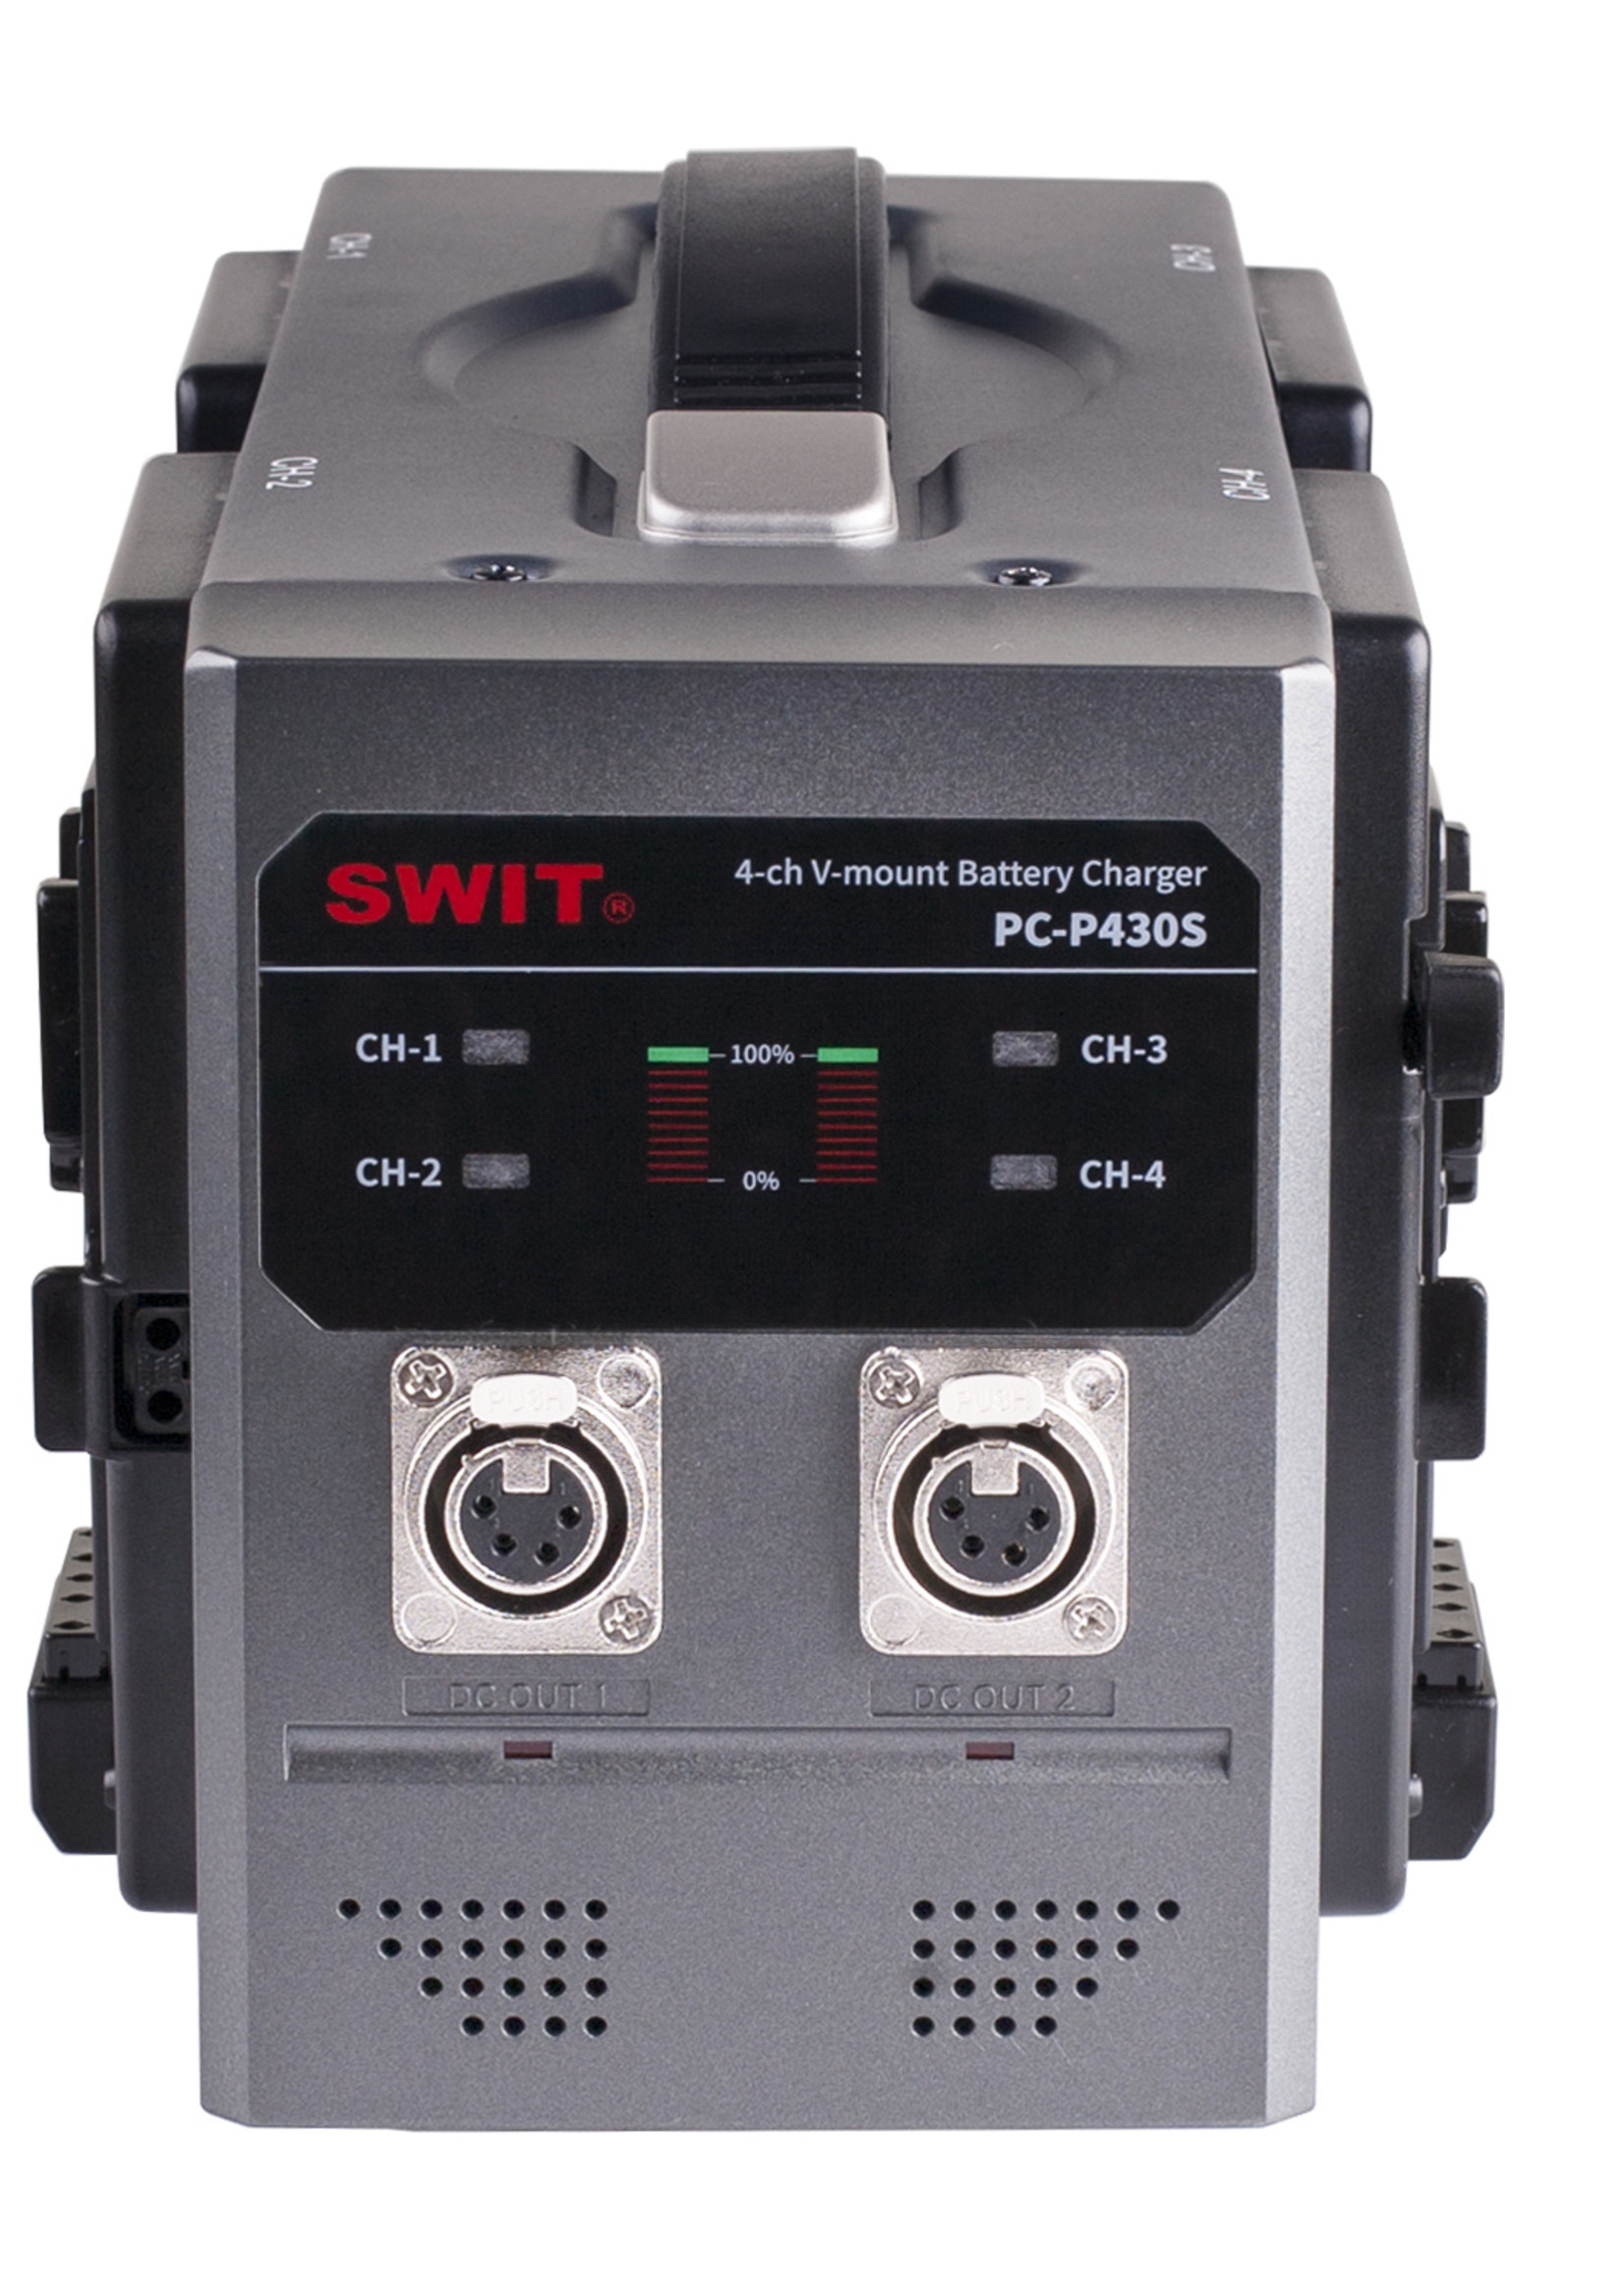 Swit PC-P430S, 4-ch Simultaneous Fast Charger